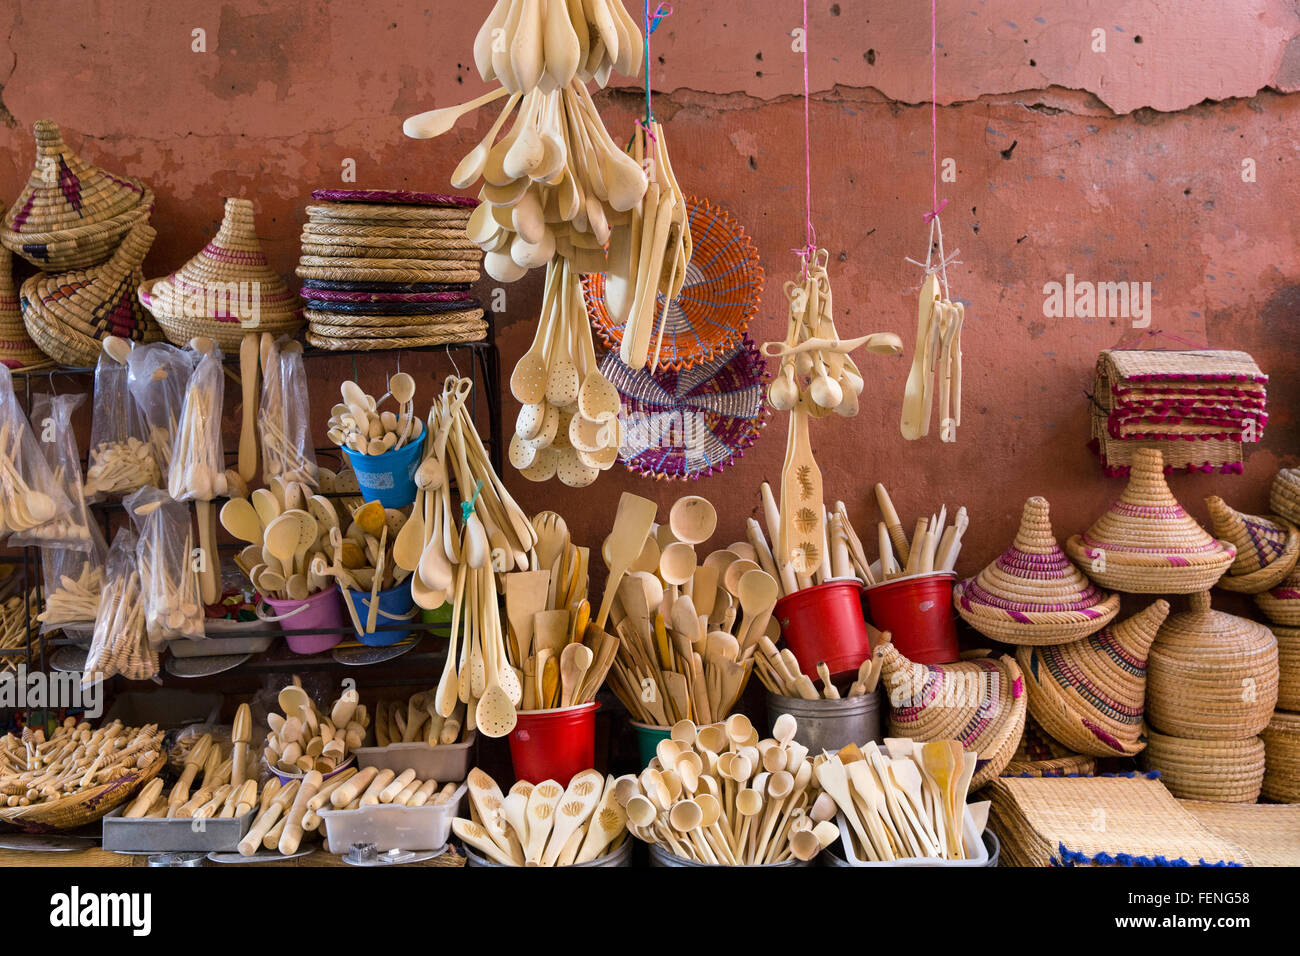 Morocco Marrakech Marrakesh medina Moroccan old souk market wooden handcrafted kitchen utensils for sale Stock Photo